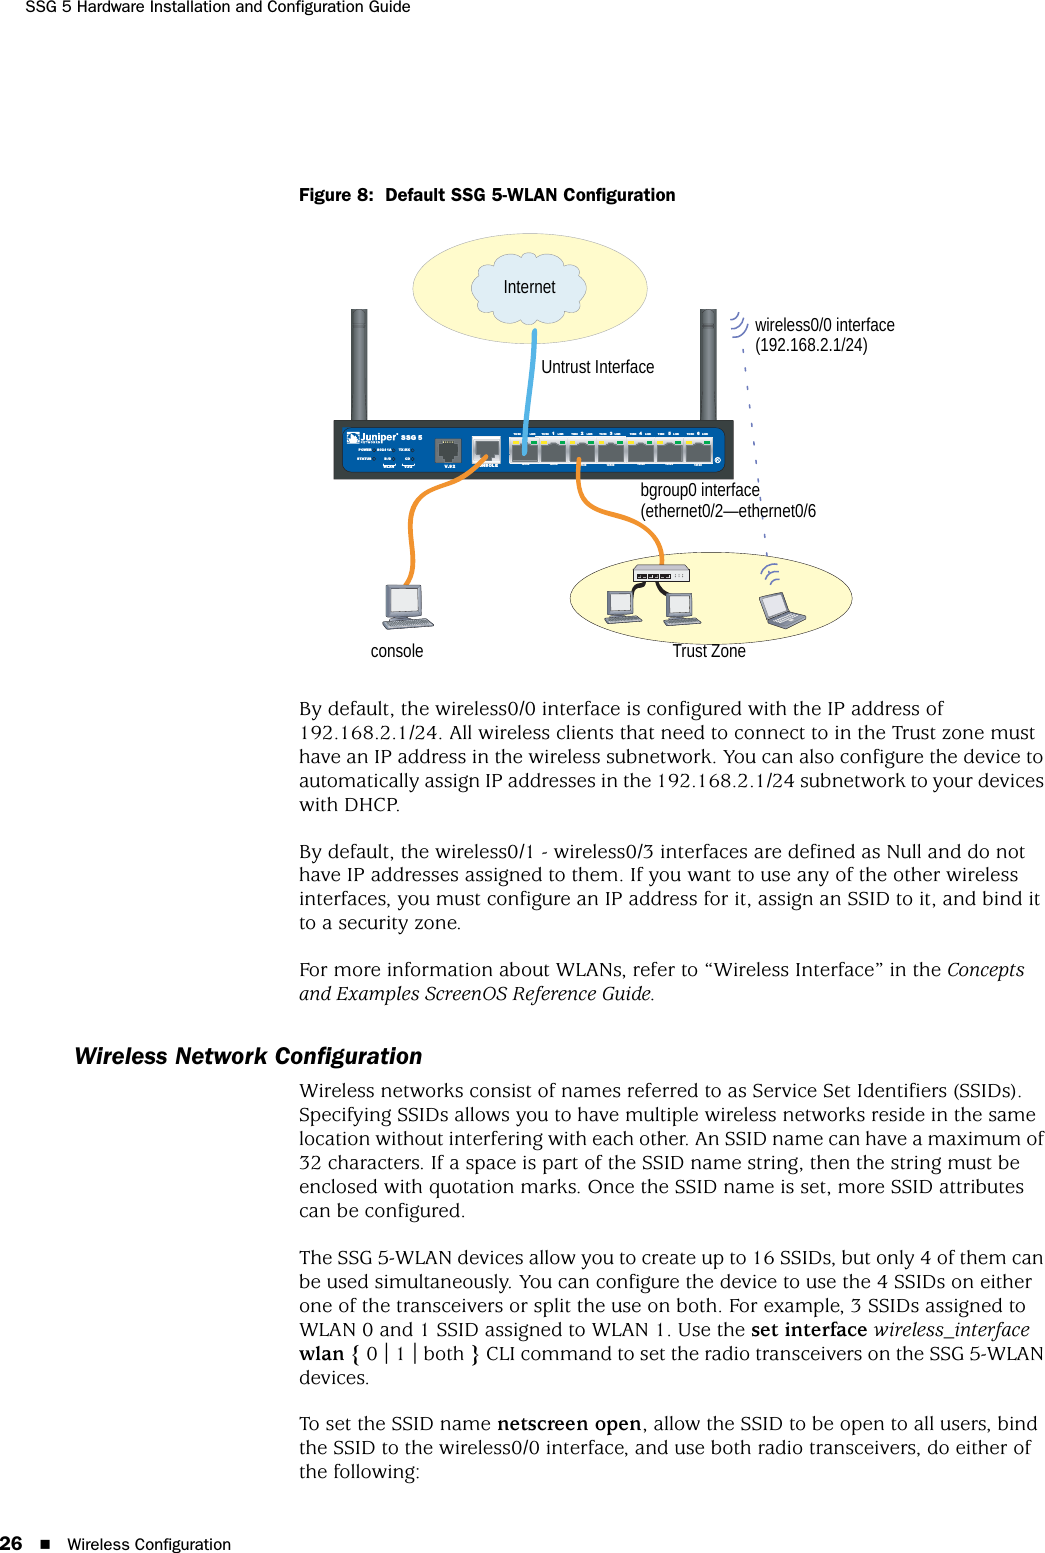 SSG 5 Hardware Installation and Configuration Guide26 Wireless ConfigurationFigure 8:  Default SSG 5-WLAN ConfigurationBy default, the wireless0/0 interface is configured with the IP address of 192.168.2.1/24. All wireless clients that need to connect to in the Trust zone must have an IP address in the wireless subnetwork. You can also configure the device to automatically assign IP addresses in the 192.168.2.1/24 subnetwork to your devices with DHCP.By default, the wireless0/1 - wireless0/3 interfaces are defined as Null and do not have IP addresses assigned to them. If you want to use any of the other wireless interfaces, you must configure an IP address for it, assign an SSID to it, and bind it to a security zone.For more information about WLANs, refer to “Wireless Interface” in the Concepts and Examples ScreenOS Reference Guide.Wireless Network ConfigurationWireless networks consist of names referred to as Service Set Identifiers (SSIDs). Specifying SSIDs allows you to have multiple wireless networks reside in the same location without interfering with each other. An SSID name can have a maximum of 32 characters. If a space is part of the SSID name string, then the string must be enclosed with quotation marks. Once the SSID name is set, more SSID attributes can be configured.The SSG 5-WLAN devices allow you to create up to 16 SSIDs, but only 4 of them can be used simultaneously. You can configure the device to use the 4 SSIDs on either one of the transceivers or split the use on both. For example, 3 SSIDs assigned to WLAN 0 and 1 SSID assigned to WLAN 1. Use the set interface wireless_interface wlan { 0 | 1 | both } CLI command to set the radio transceivers on the SSG 5-WLAN devices.To set the SSID name netscreen open, allow the SSID to be open to all users, bind the SSID to the wireless0/0 interface, and use both radio transceivers, do either of the following:SSG 5V.9 2STATUSPOWERCONSOLE  TX /RX CD01 2 3 4 5 6TX/RX LINK TX/RX LINK TX/RX LINK TX/RX L INK TX/RX LINK TX/RX LINK TX/ RX LINK10/100 10/ 100 10/100 10/100 10/100 10/100 10/100  B/GWLAN V.92802.11ACalloutsCalloutswireless0/0 interface (192.168.2.1/24)Trust Zonebgroup0 interface (ethernet0/2—ethernet0/6consoleUntrust InterfaceInternet